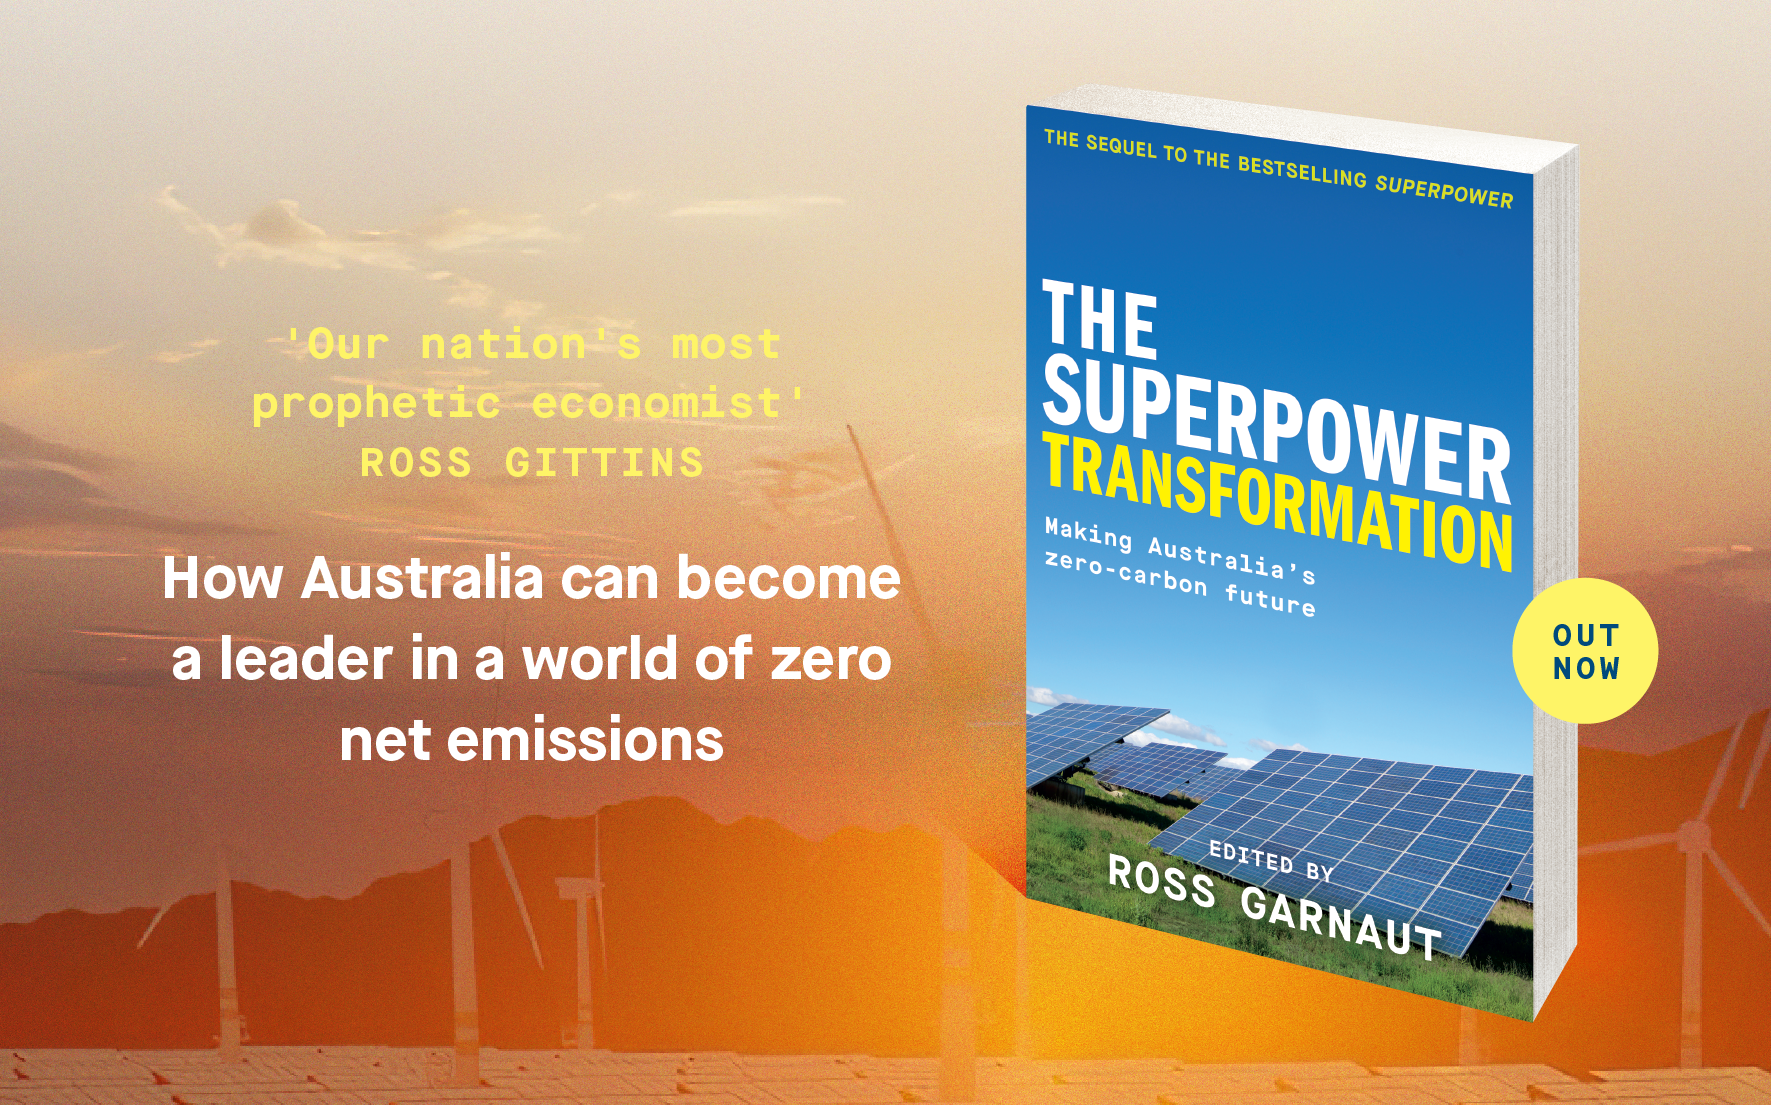 Out now: The Superpower Transformation